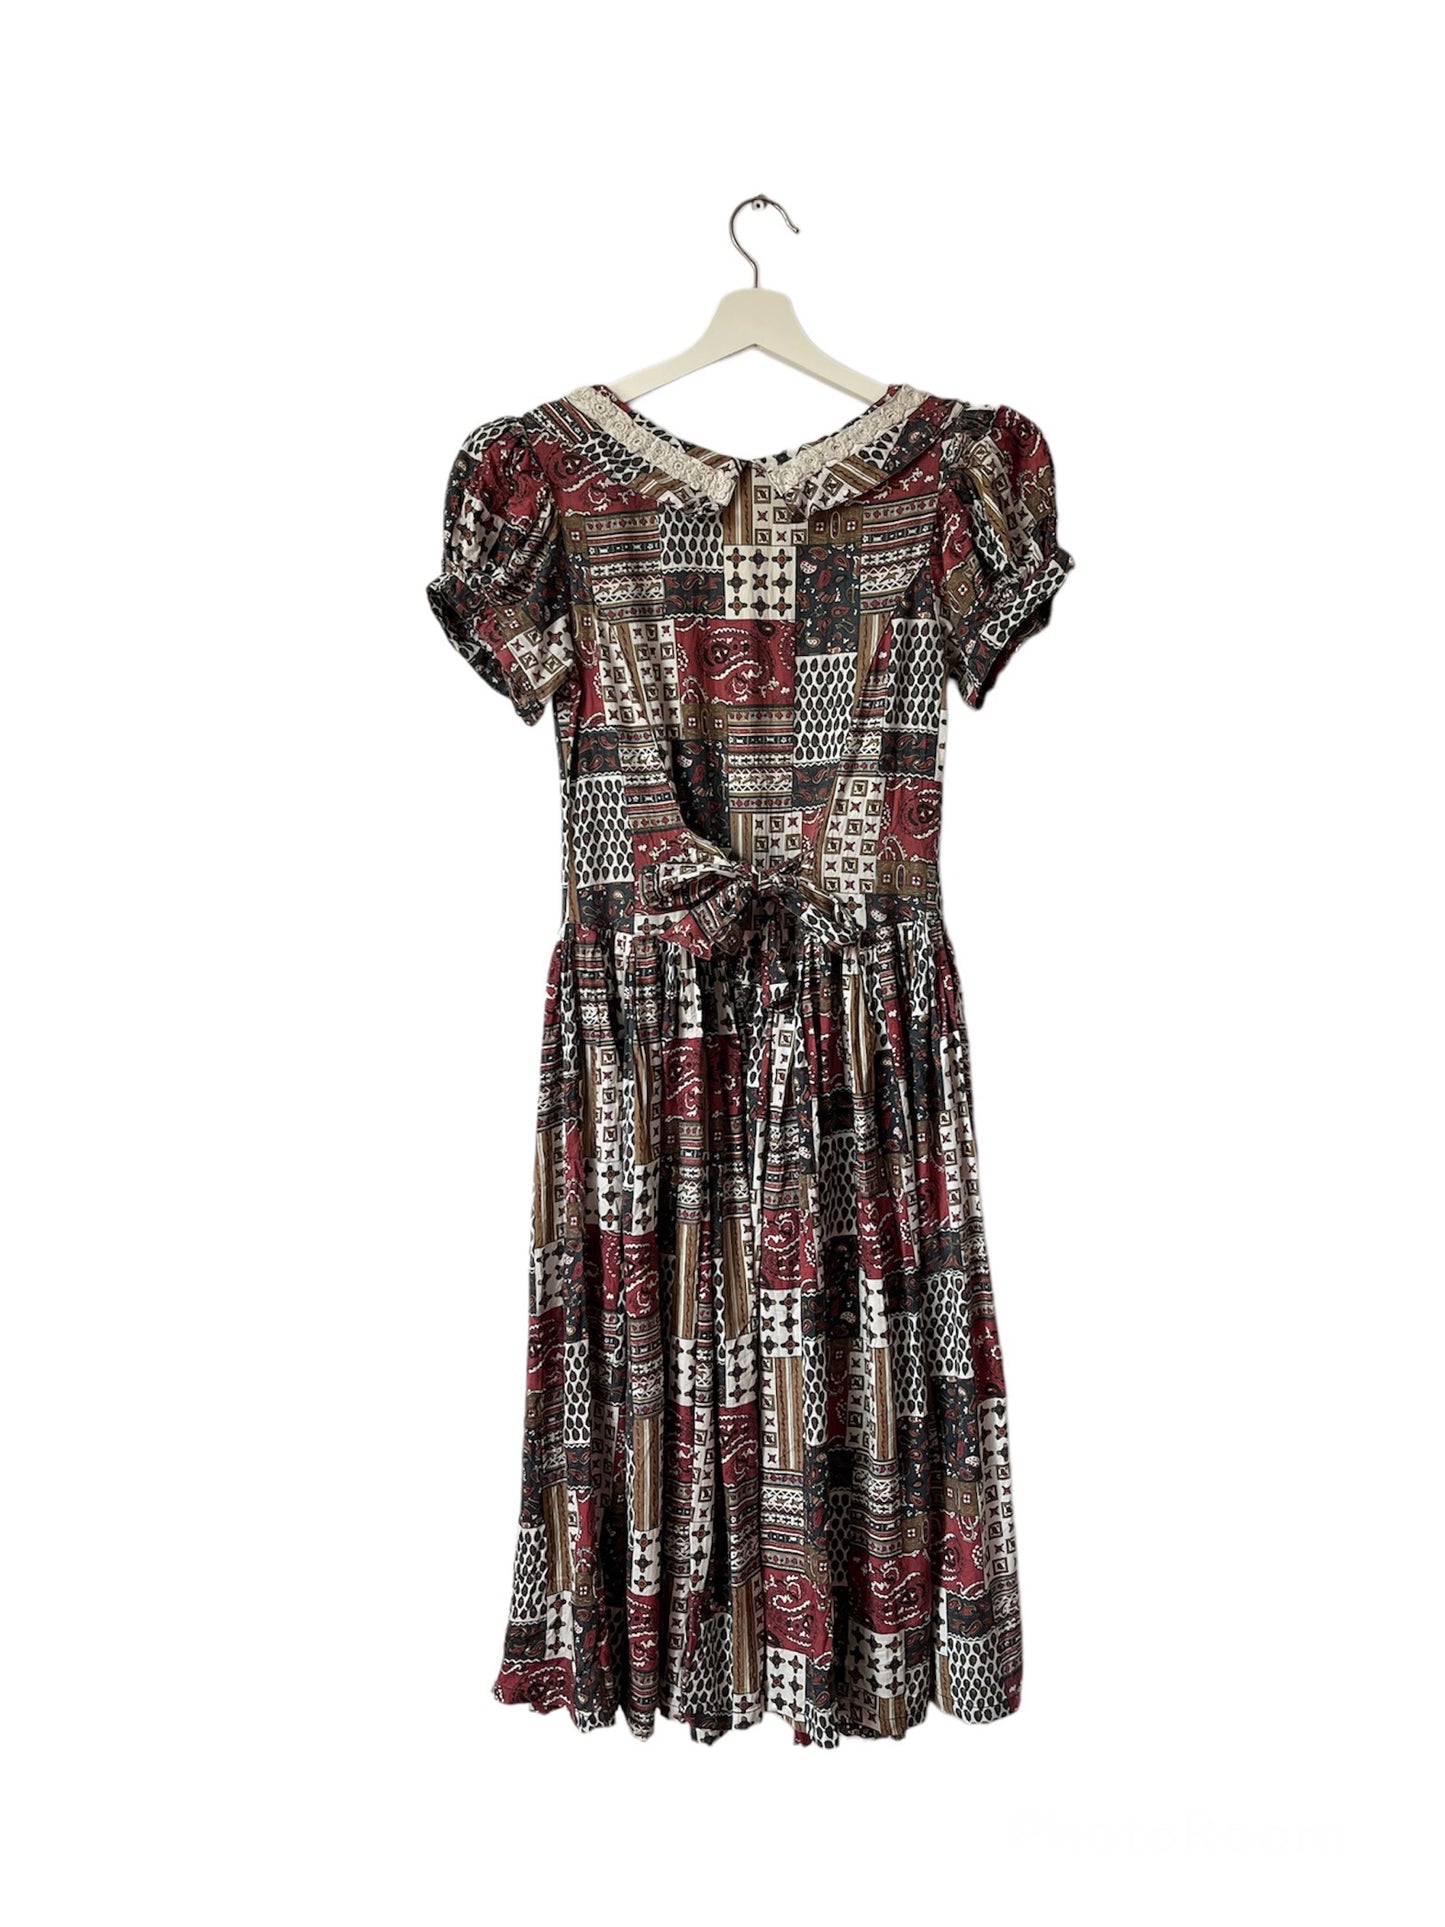 Vintage Paisley Patterned Print Collared Dress - Small